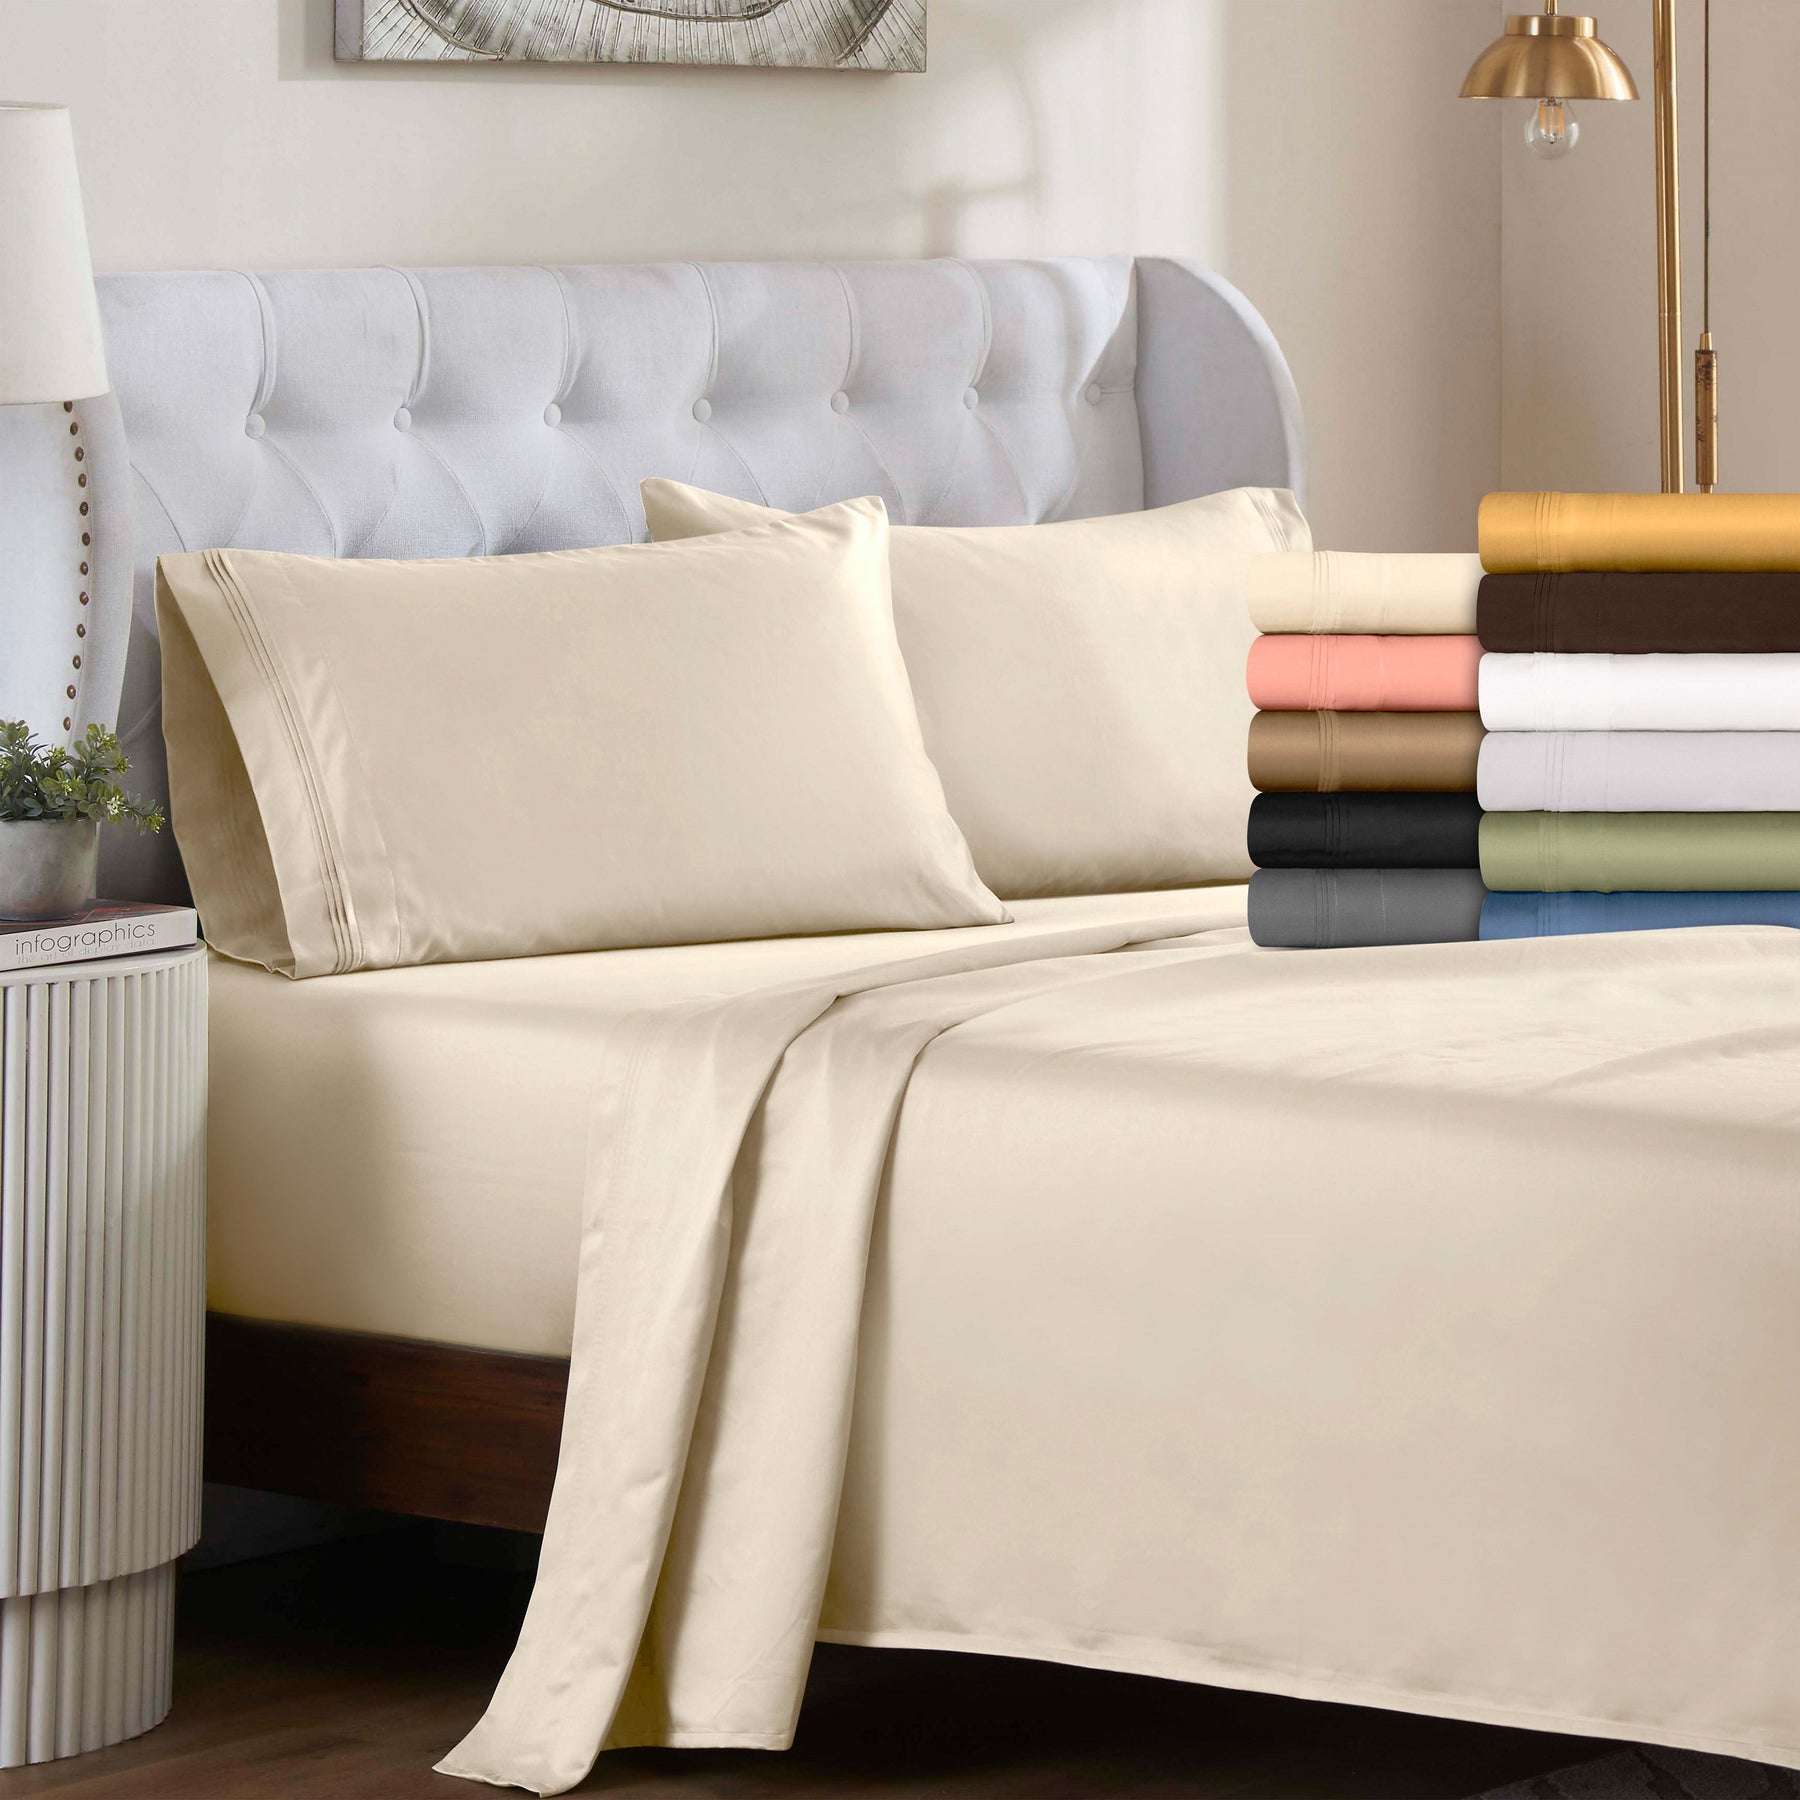 Superior 1500 Thread Count Egyptian Cotton Solid 4 Piece Bed Sheet Set